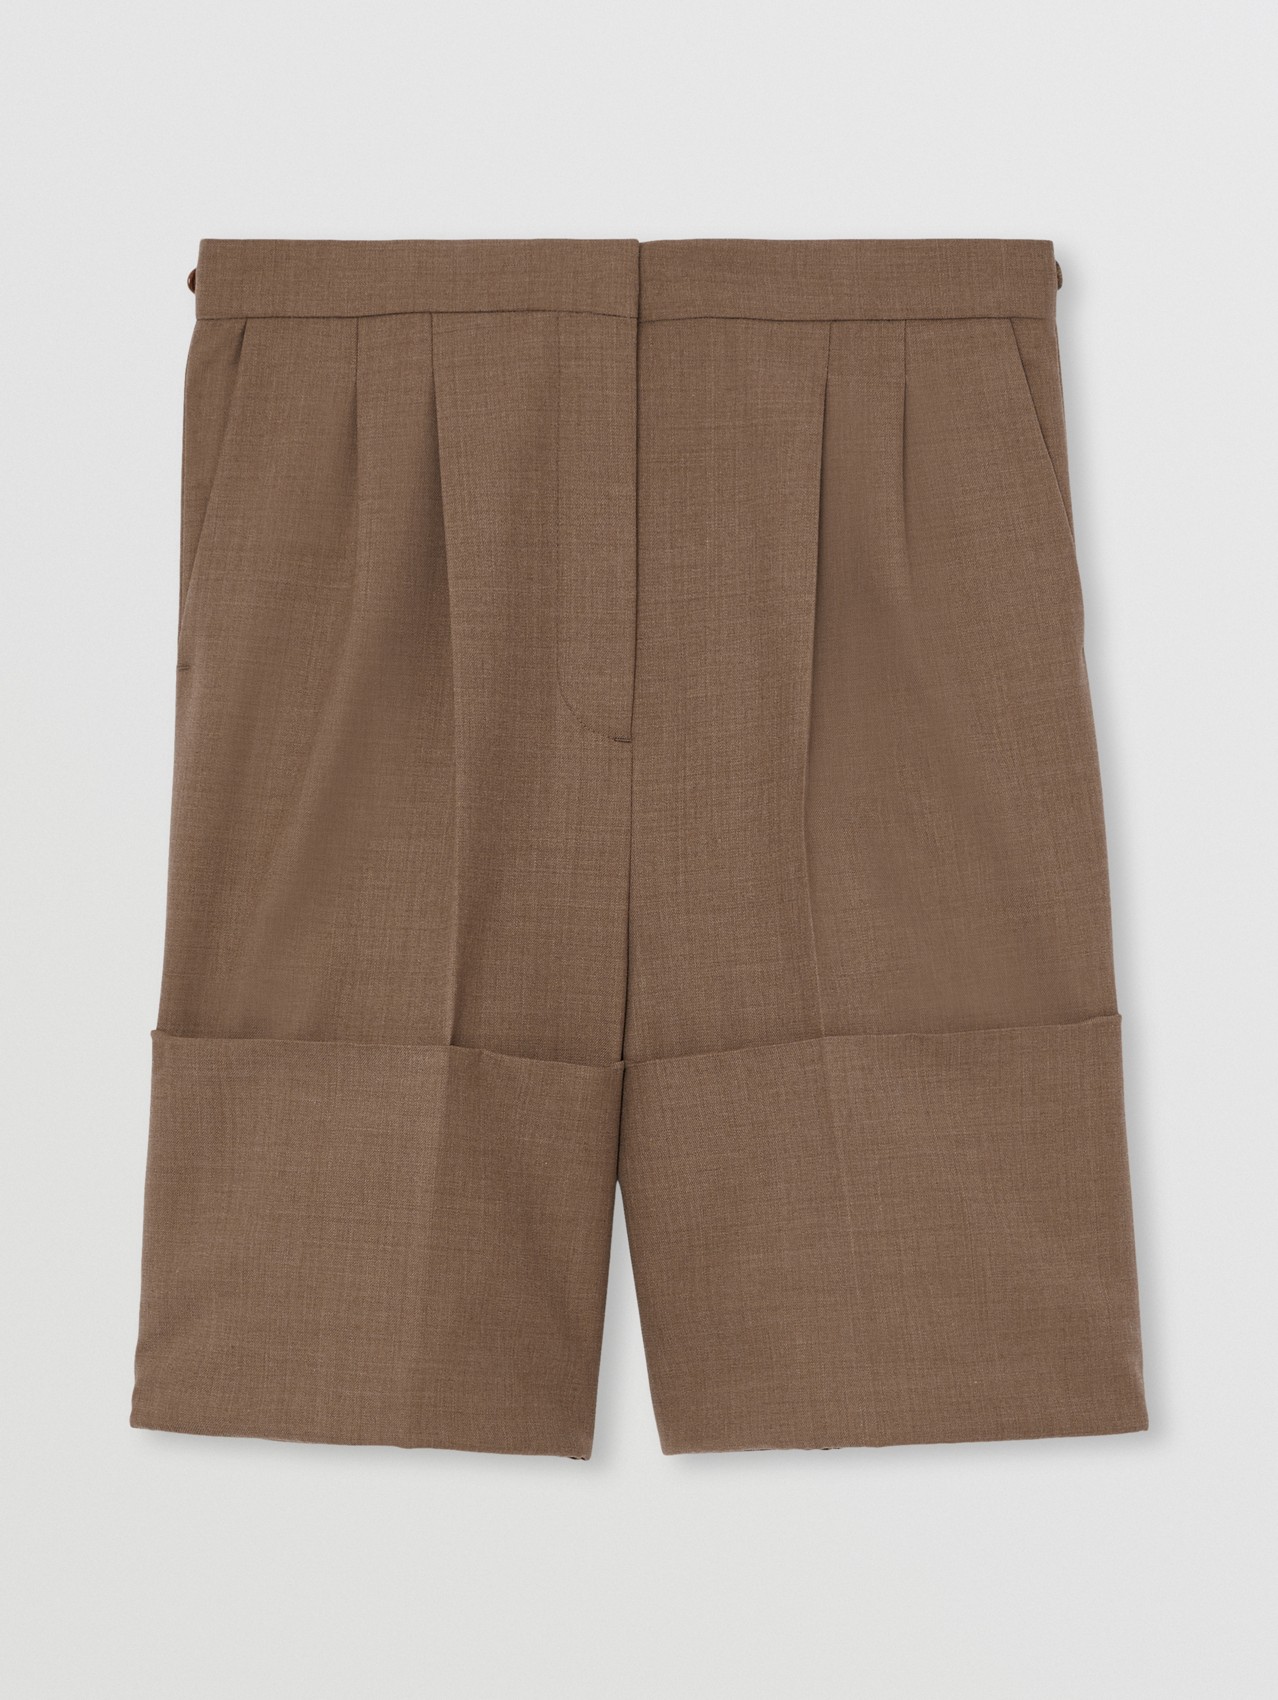 Cuff Detail Wool Tailored Shorts in Deep Taupe